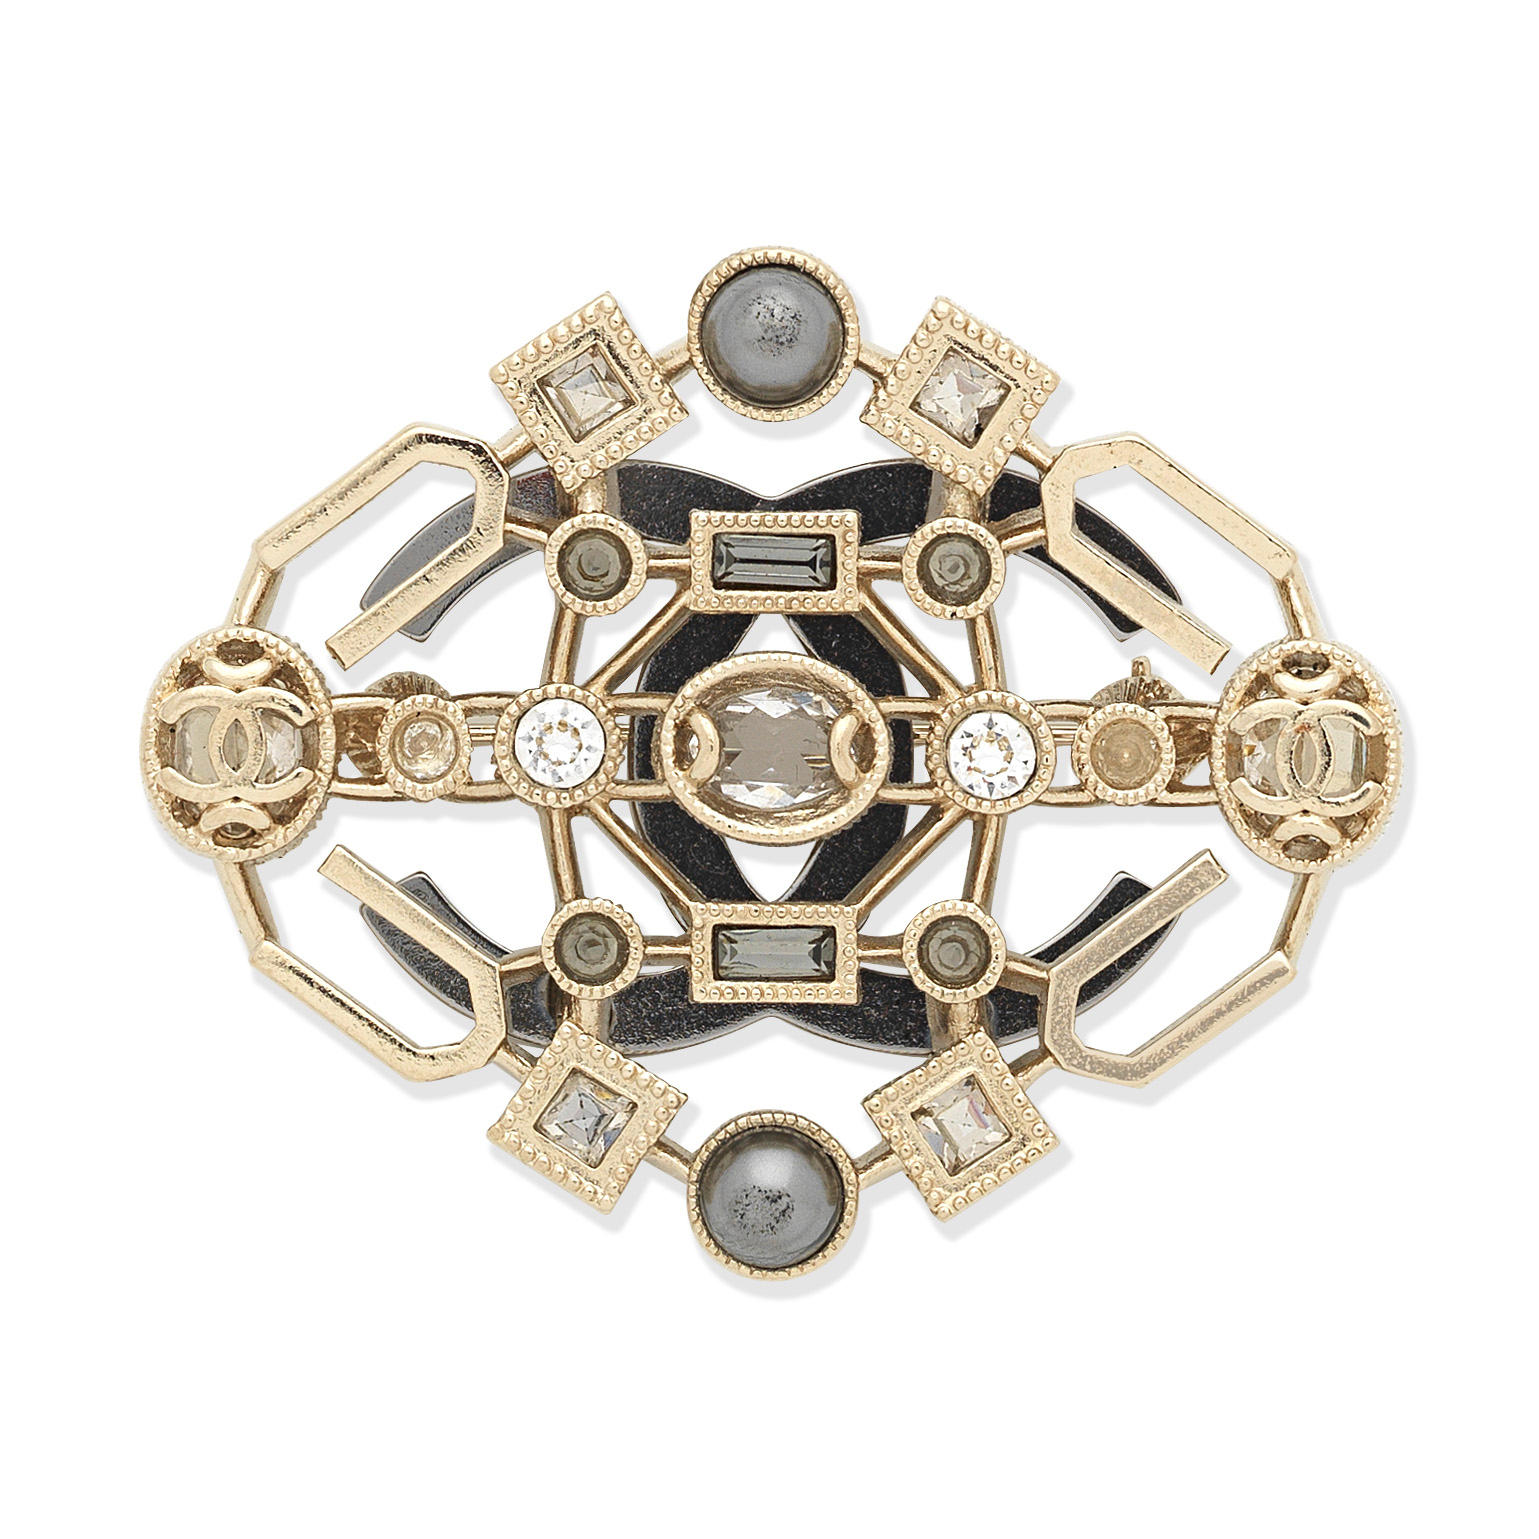 Bonhams : Karl Lagerfeld for Chanel a Champagne Gold and Crystal